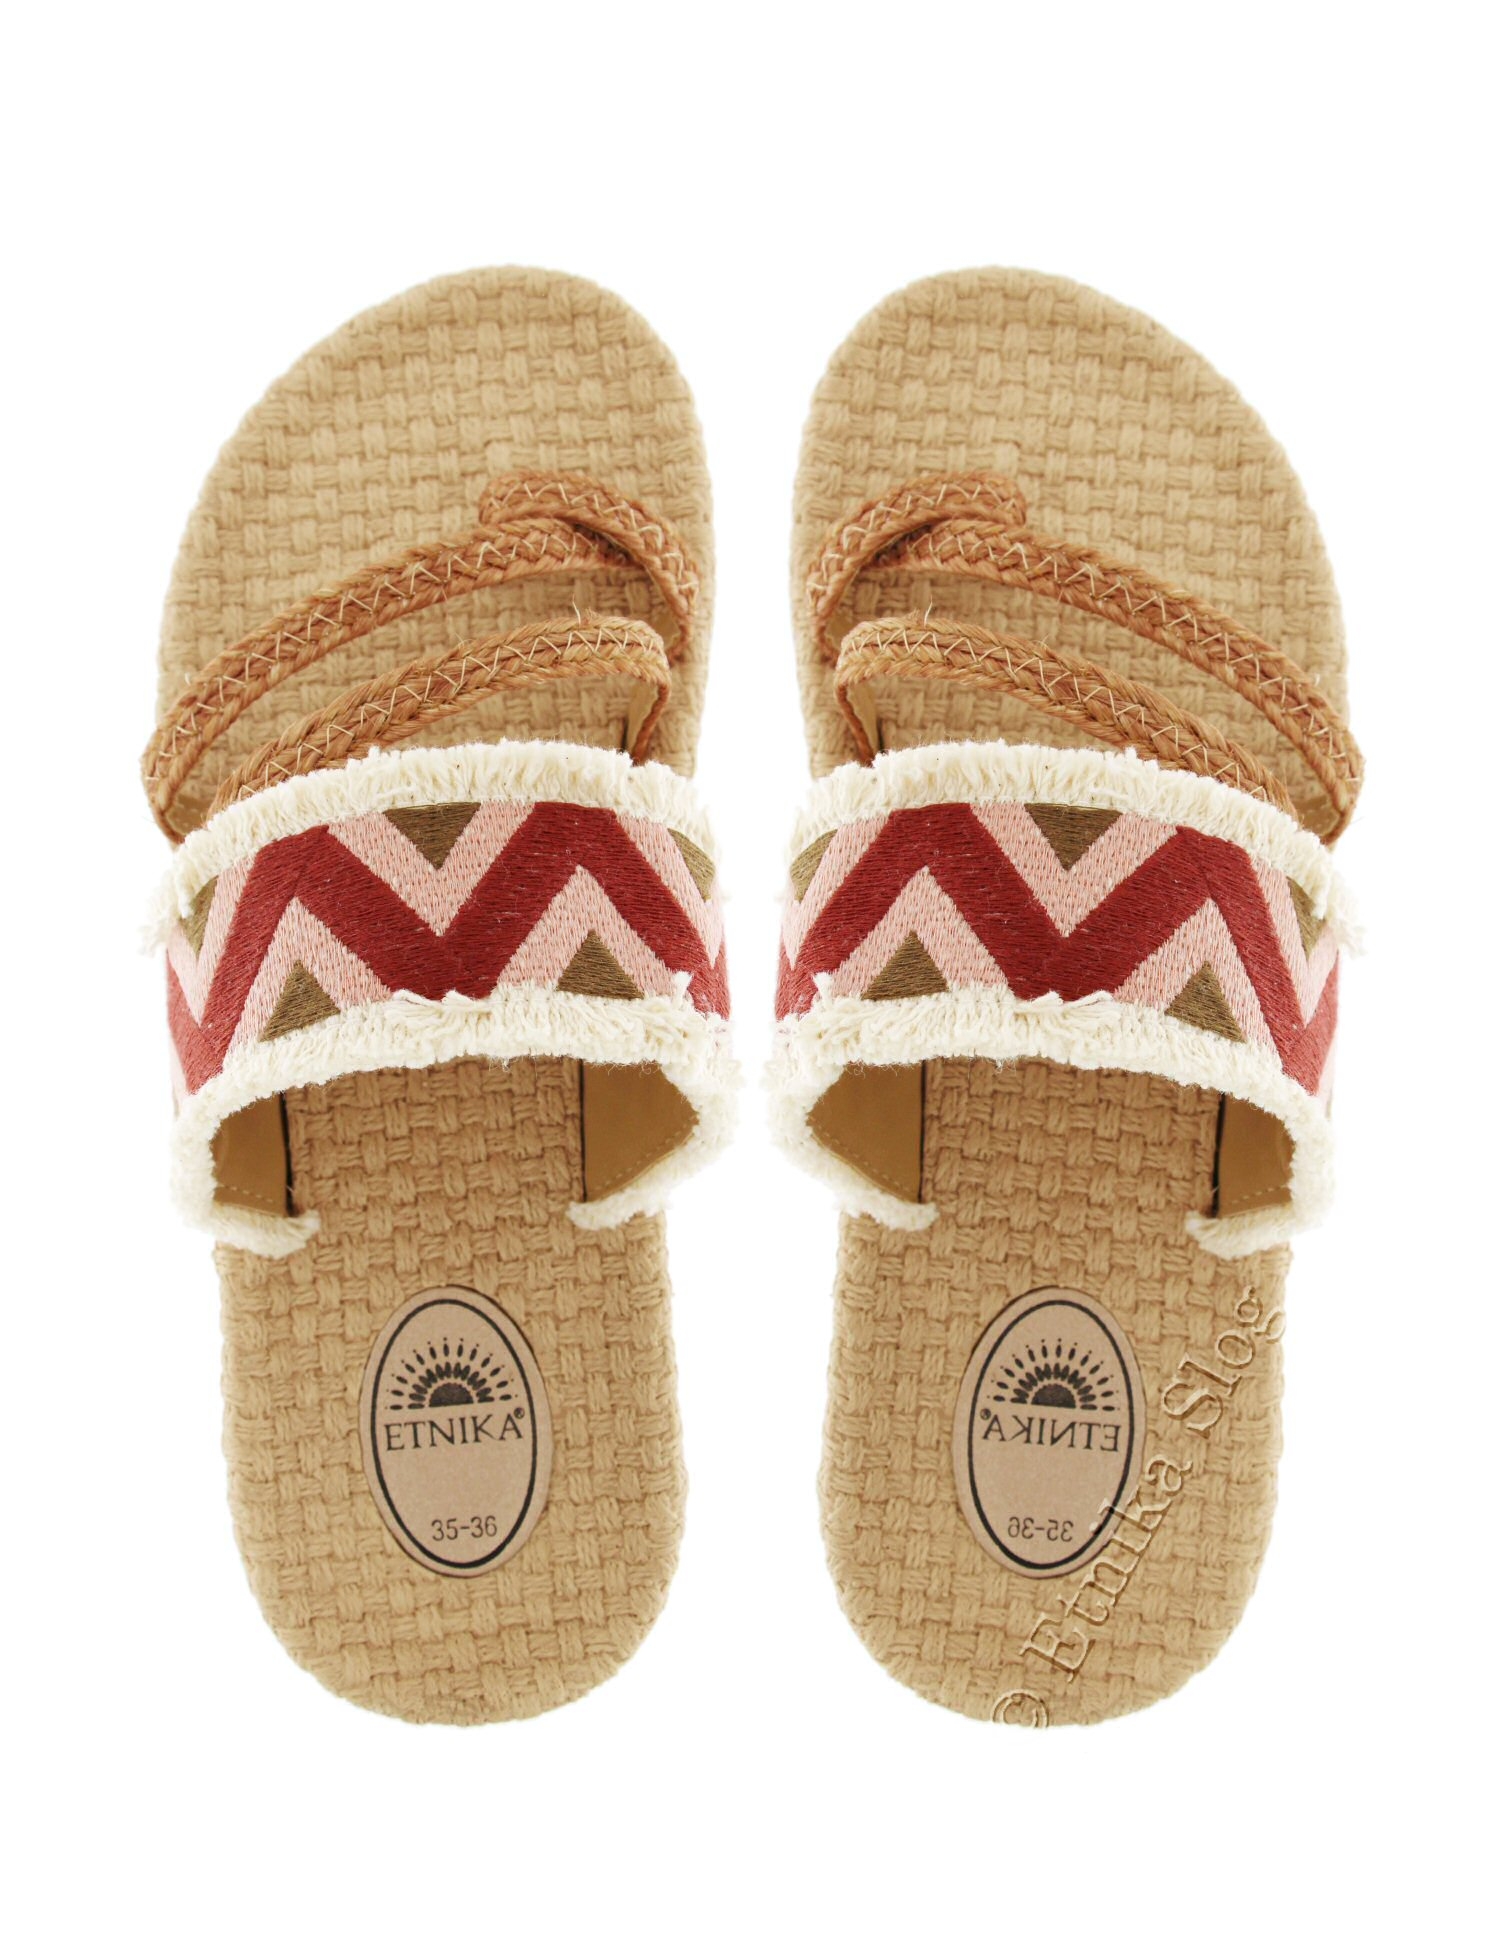 SANDALS AND MULES SN-THT17-01 - Oriente Import S.r.l.